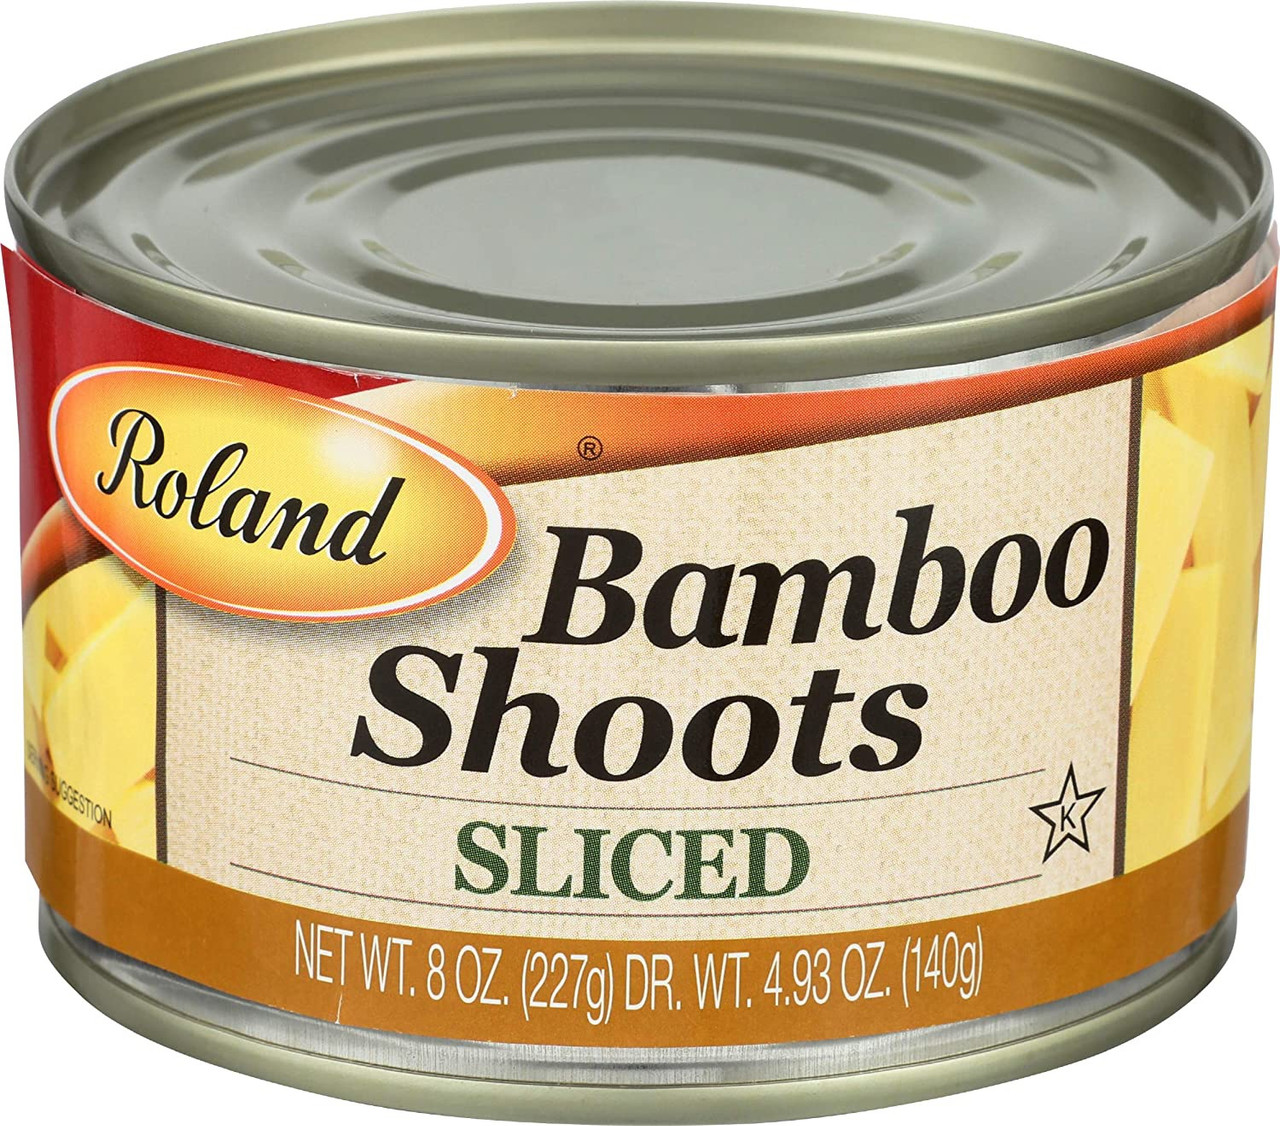 8oz　ROLAND　SHOOTS　Ally　BAMBOO　SLICED　A.　227g　Sons